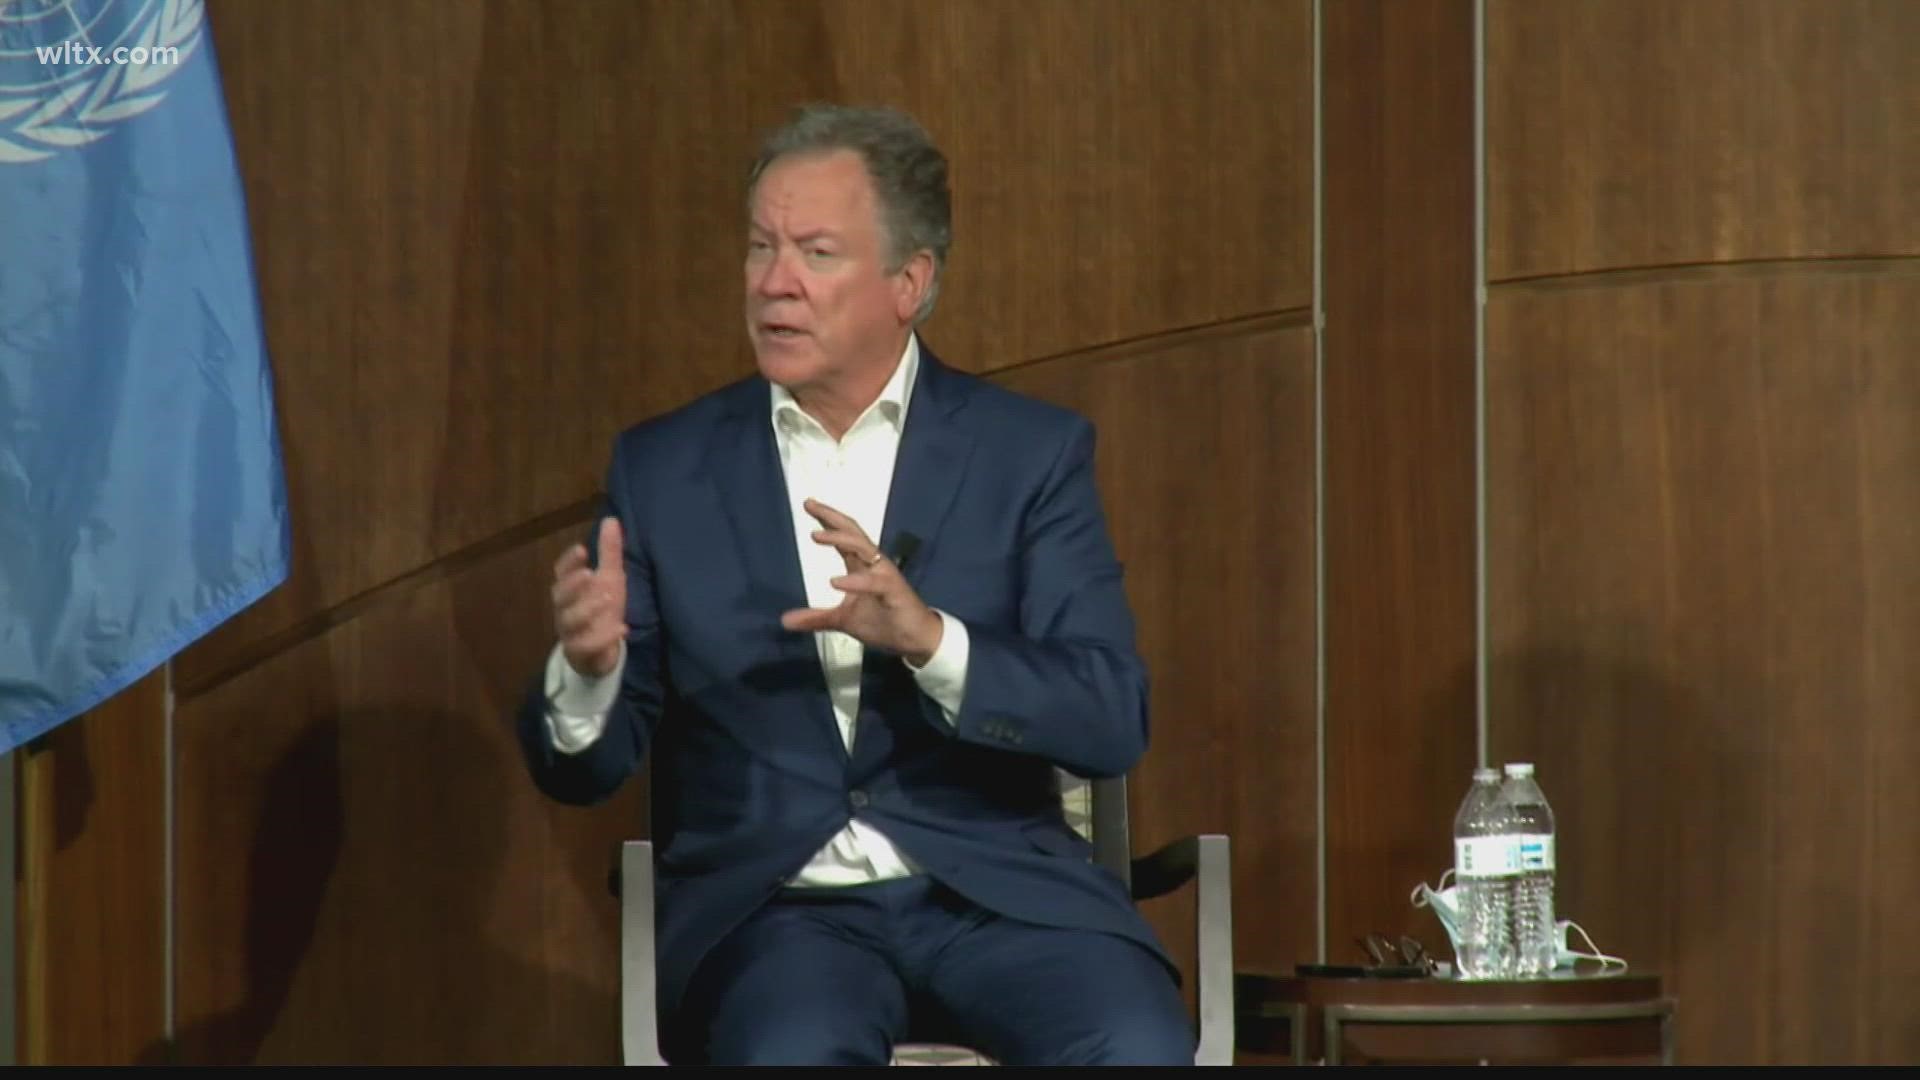 USC alumni and ABC News correspondent Kenneth Moton moderated a panel that included former SC Governor David Beasley, and Interim President of USC Harris Pastides.